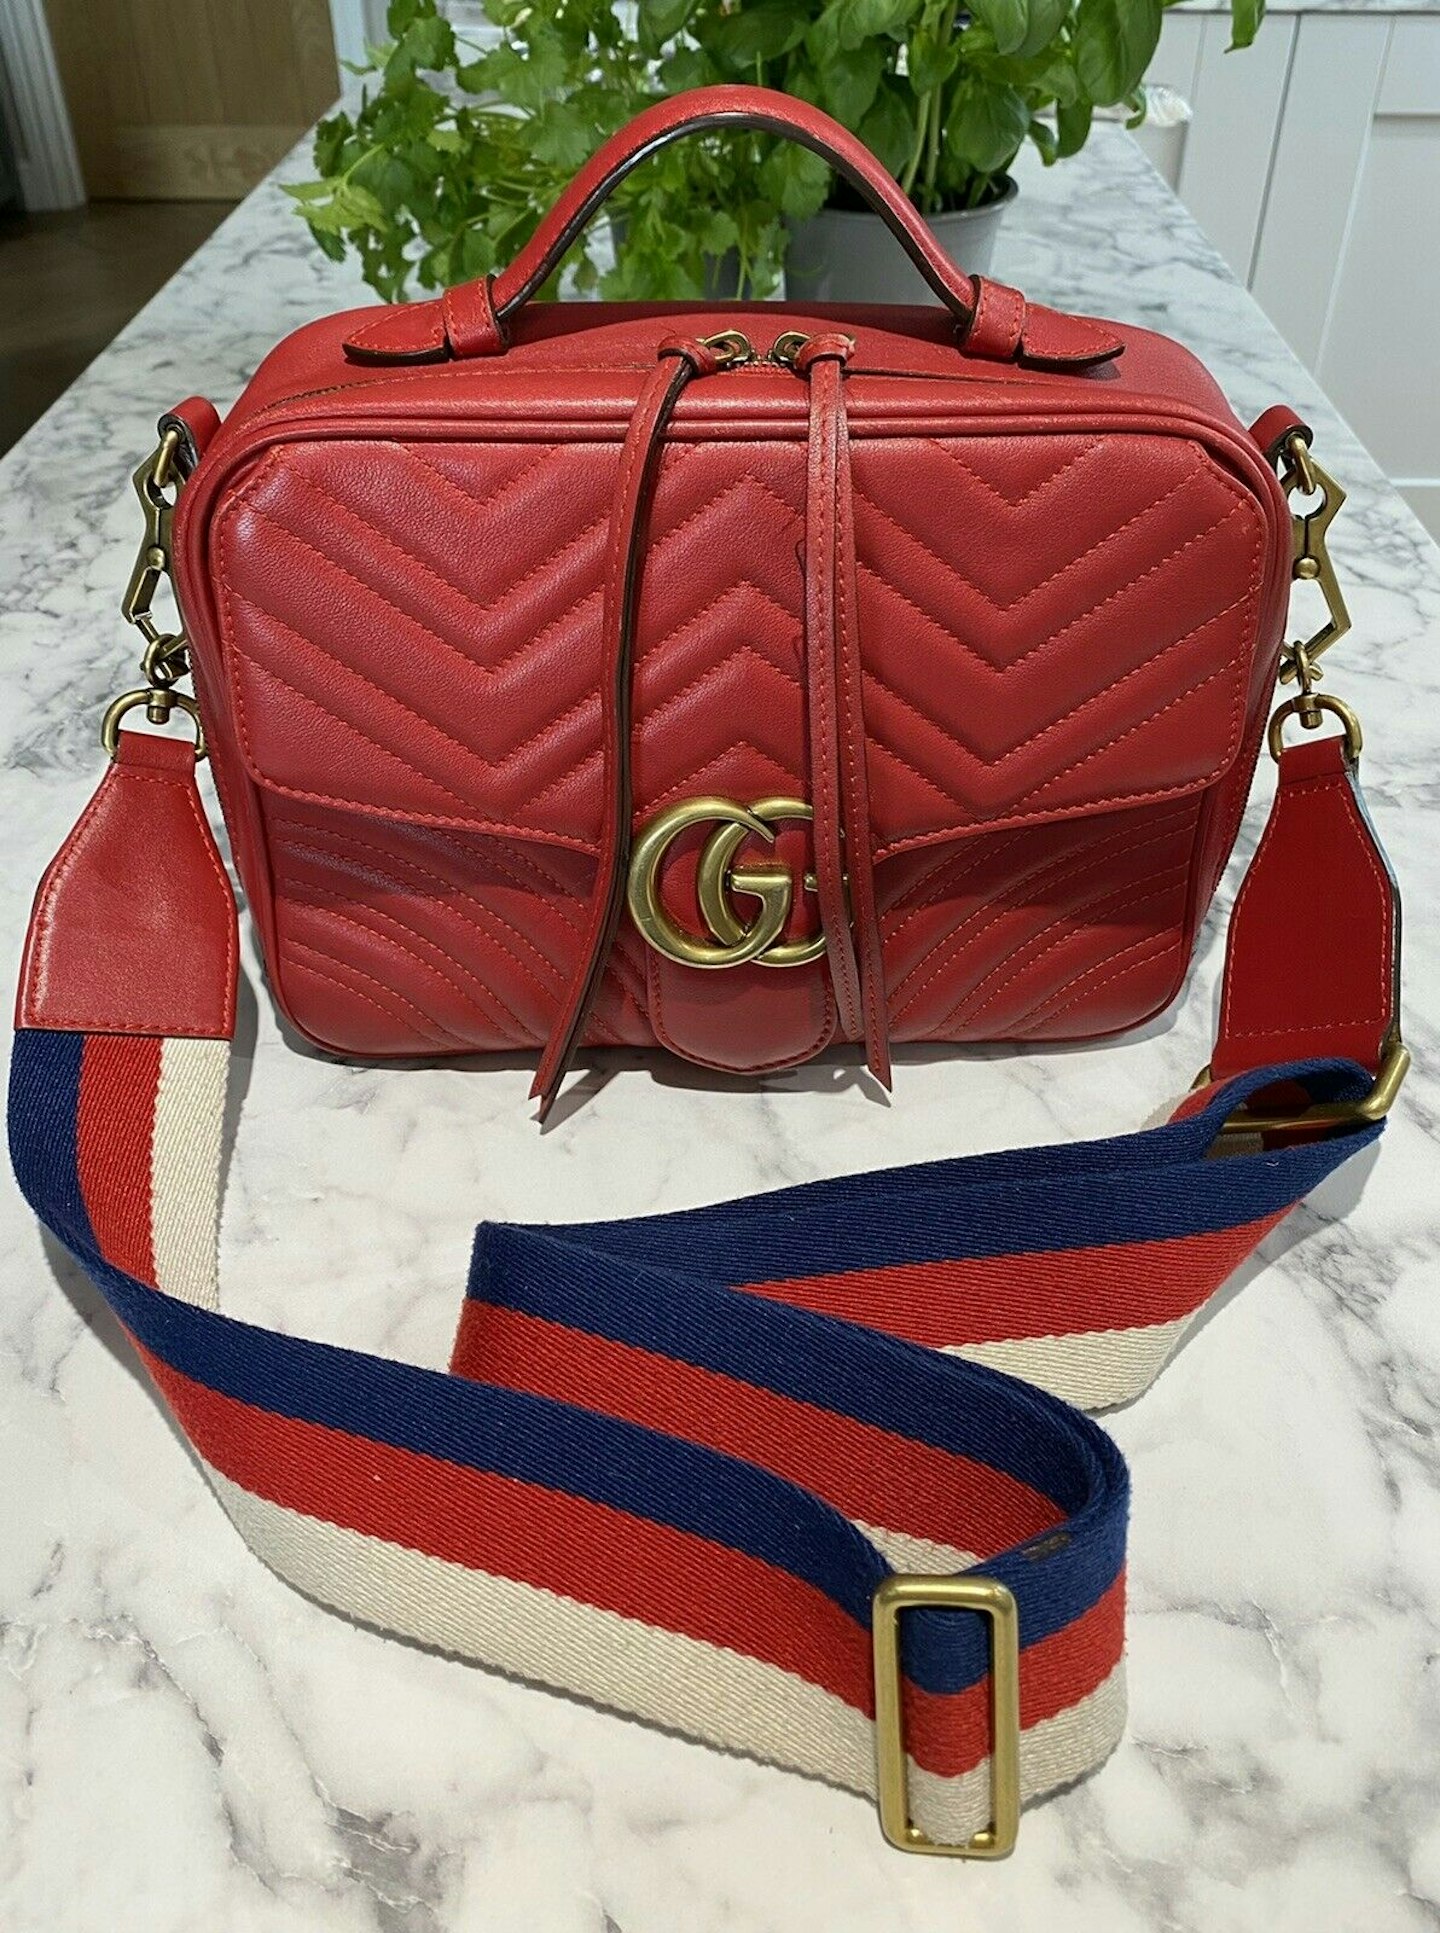 Gucci Marmont Matelasse Red Leather Bag, £650